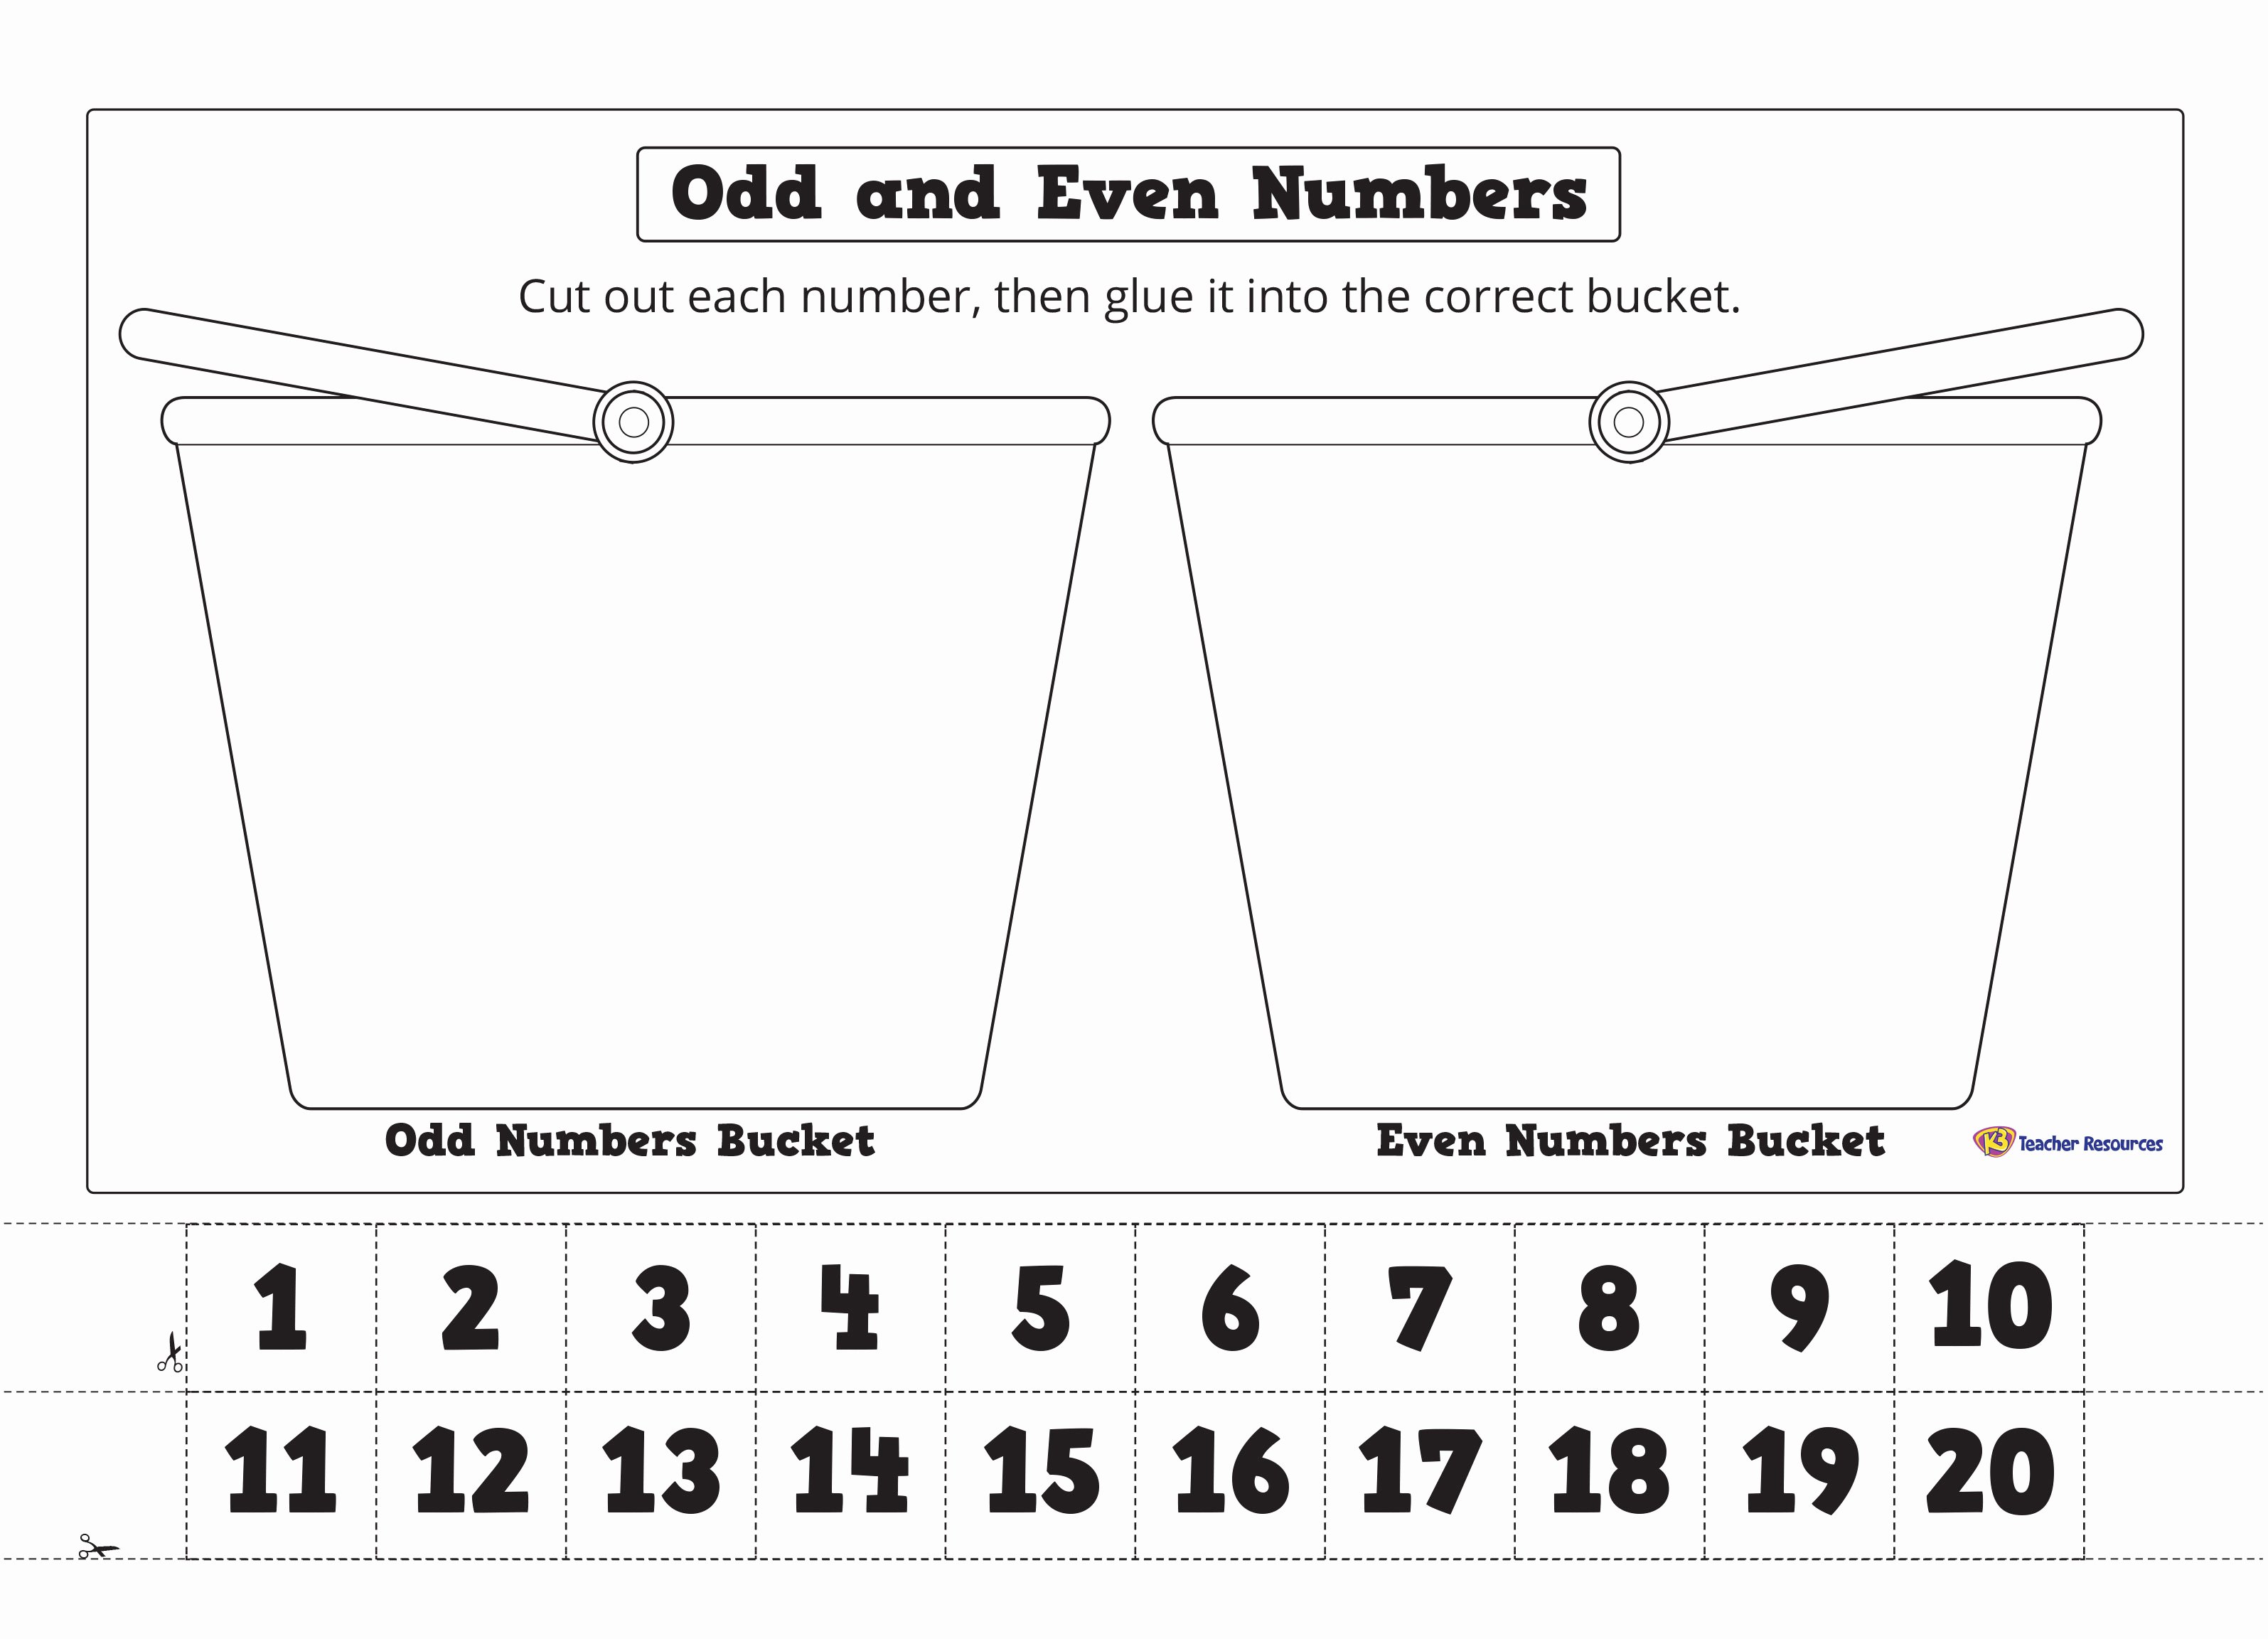 Odd and even Numbers Worksheet New Odd and even Numbers Cut and Paste Bucket Worksheet K